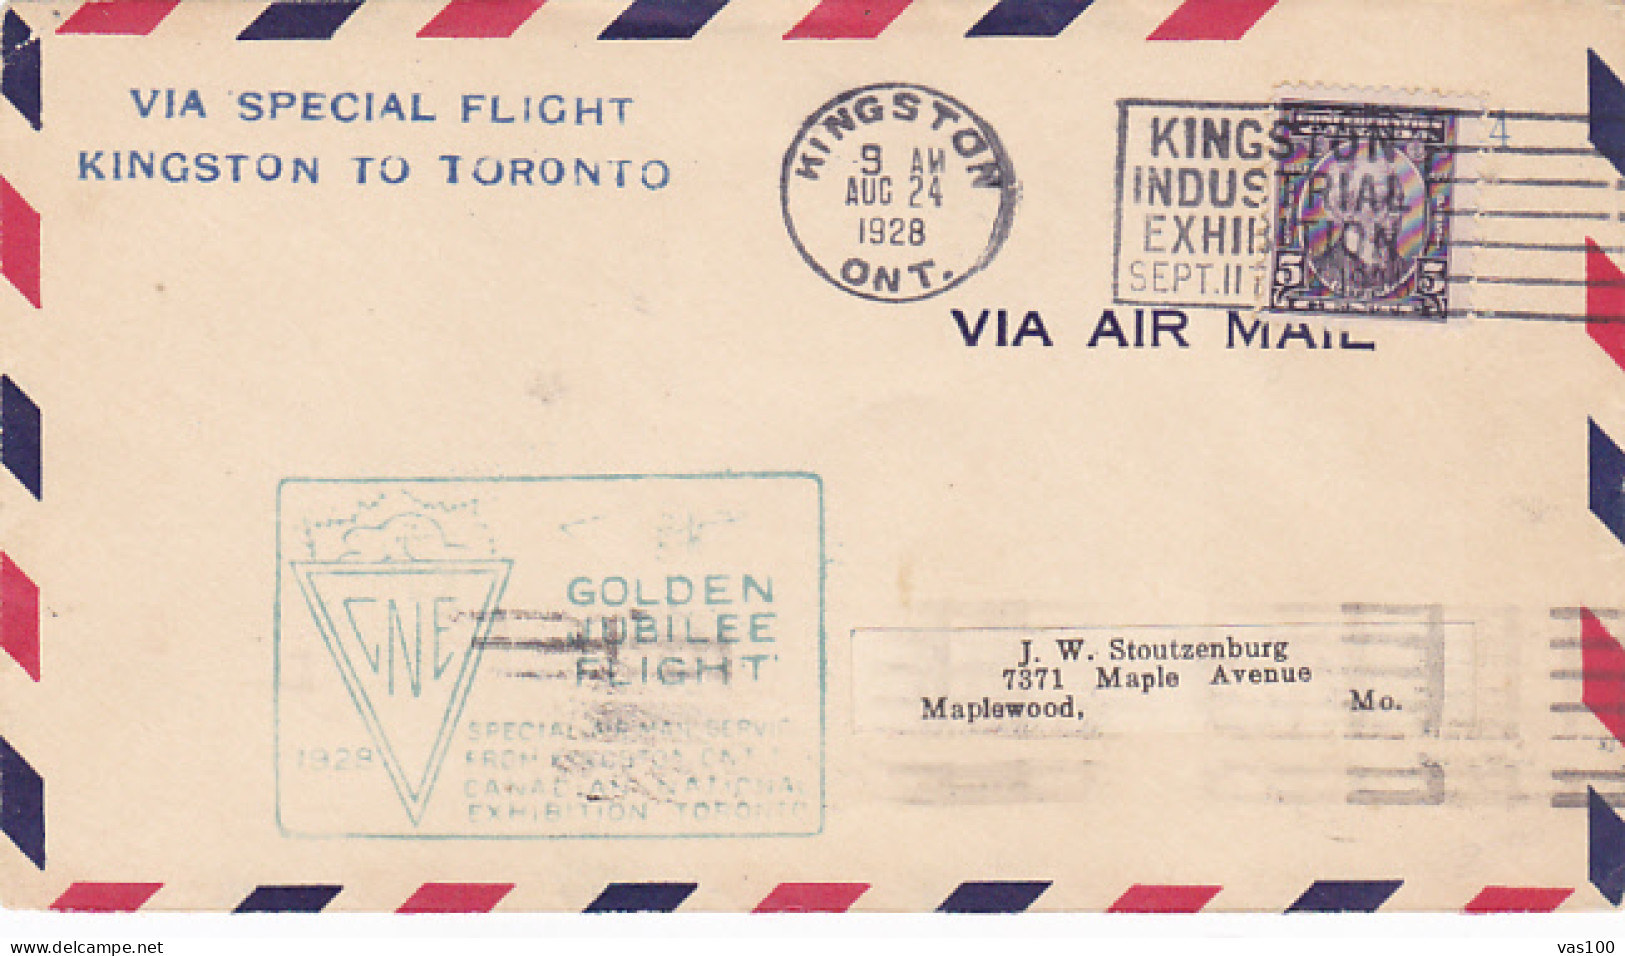 CNE GOLDEN JUBILEE FLIGHT, KINGSTON INDUSTRIAL EXHIBITION POSTMARKS, SIR LAURIER, STAMP ON COVER, 1928, CANADA - Cartas & Documentos